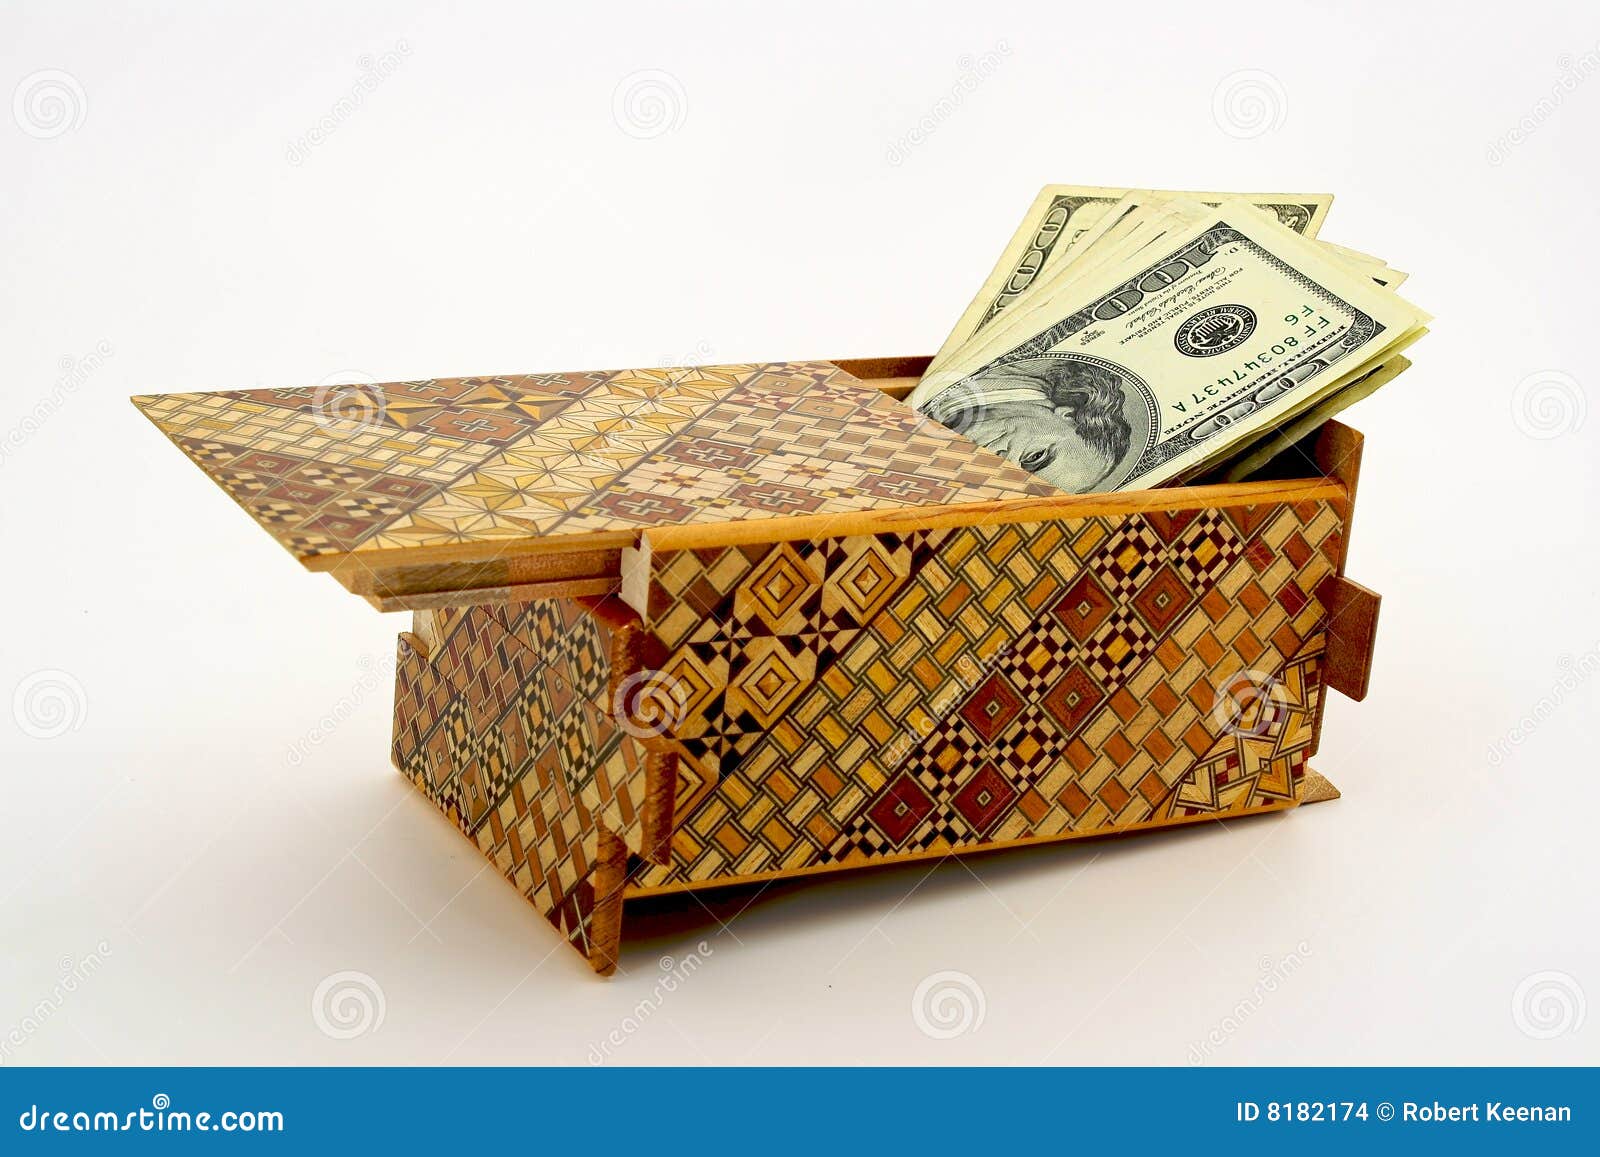 Cash Hidden In A Puzzle Box Stock Images - Image: 8182174